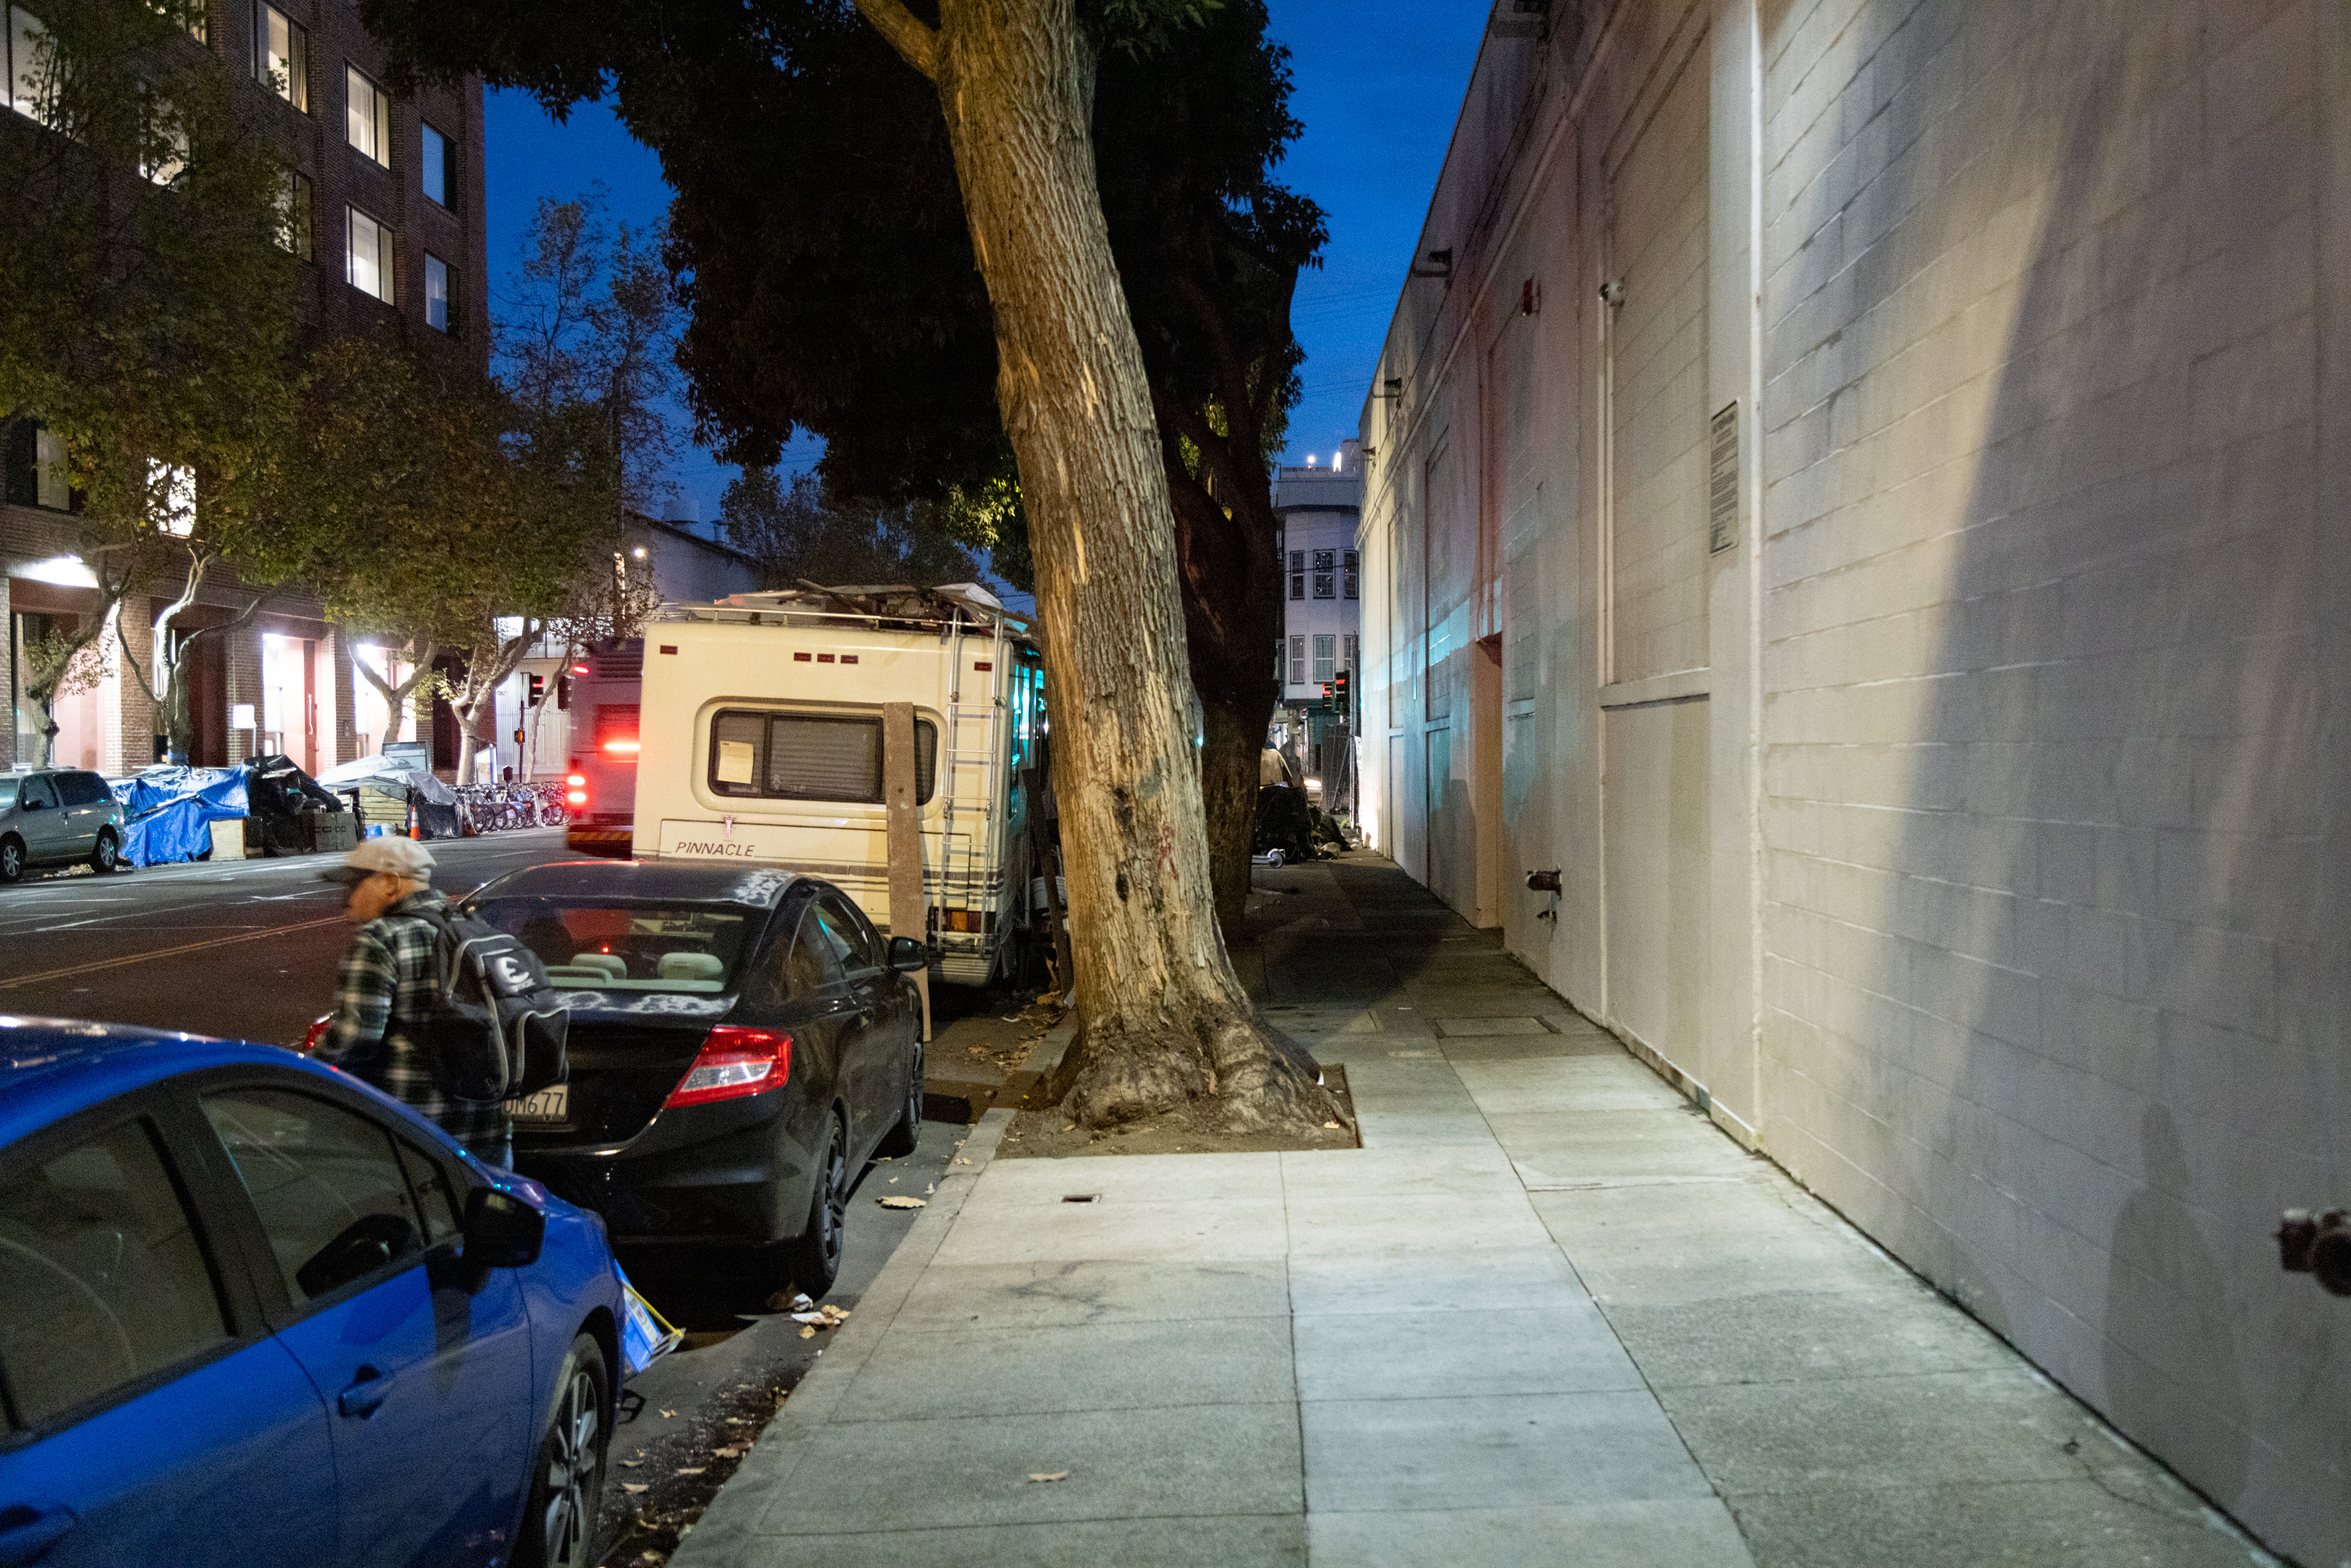 A row of cars with an RV are parked a brightly light side walk at night. 